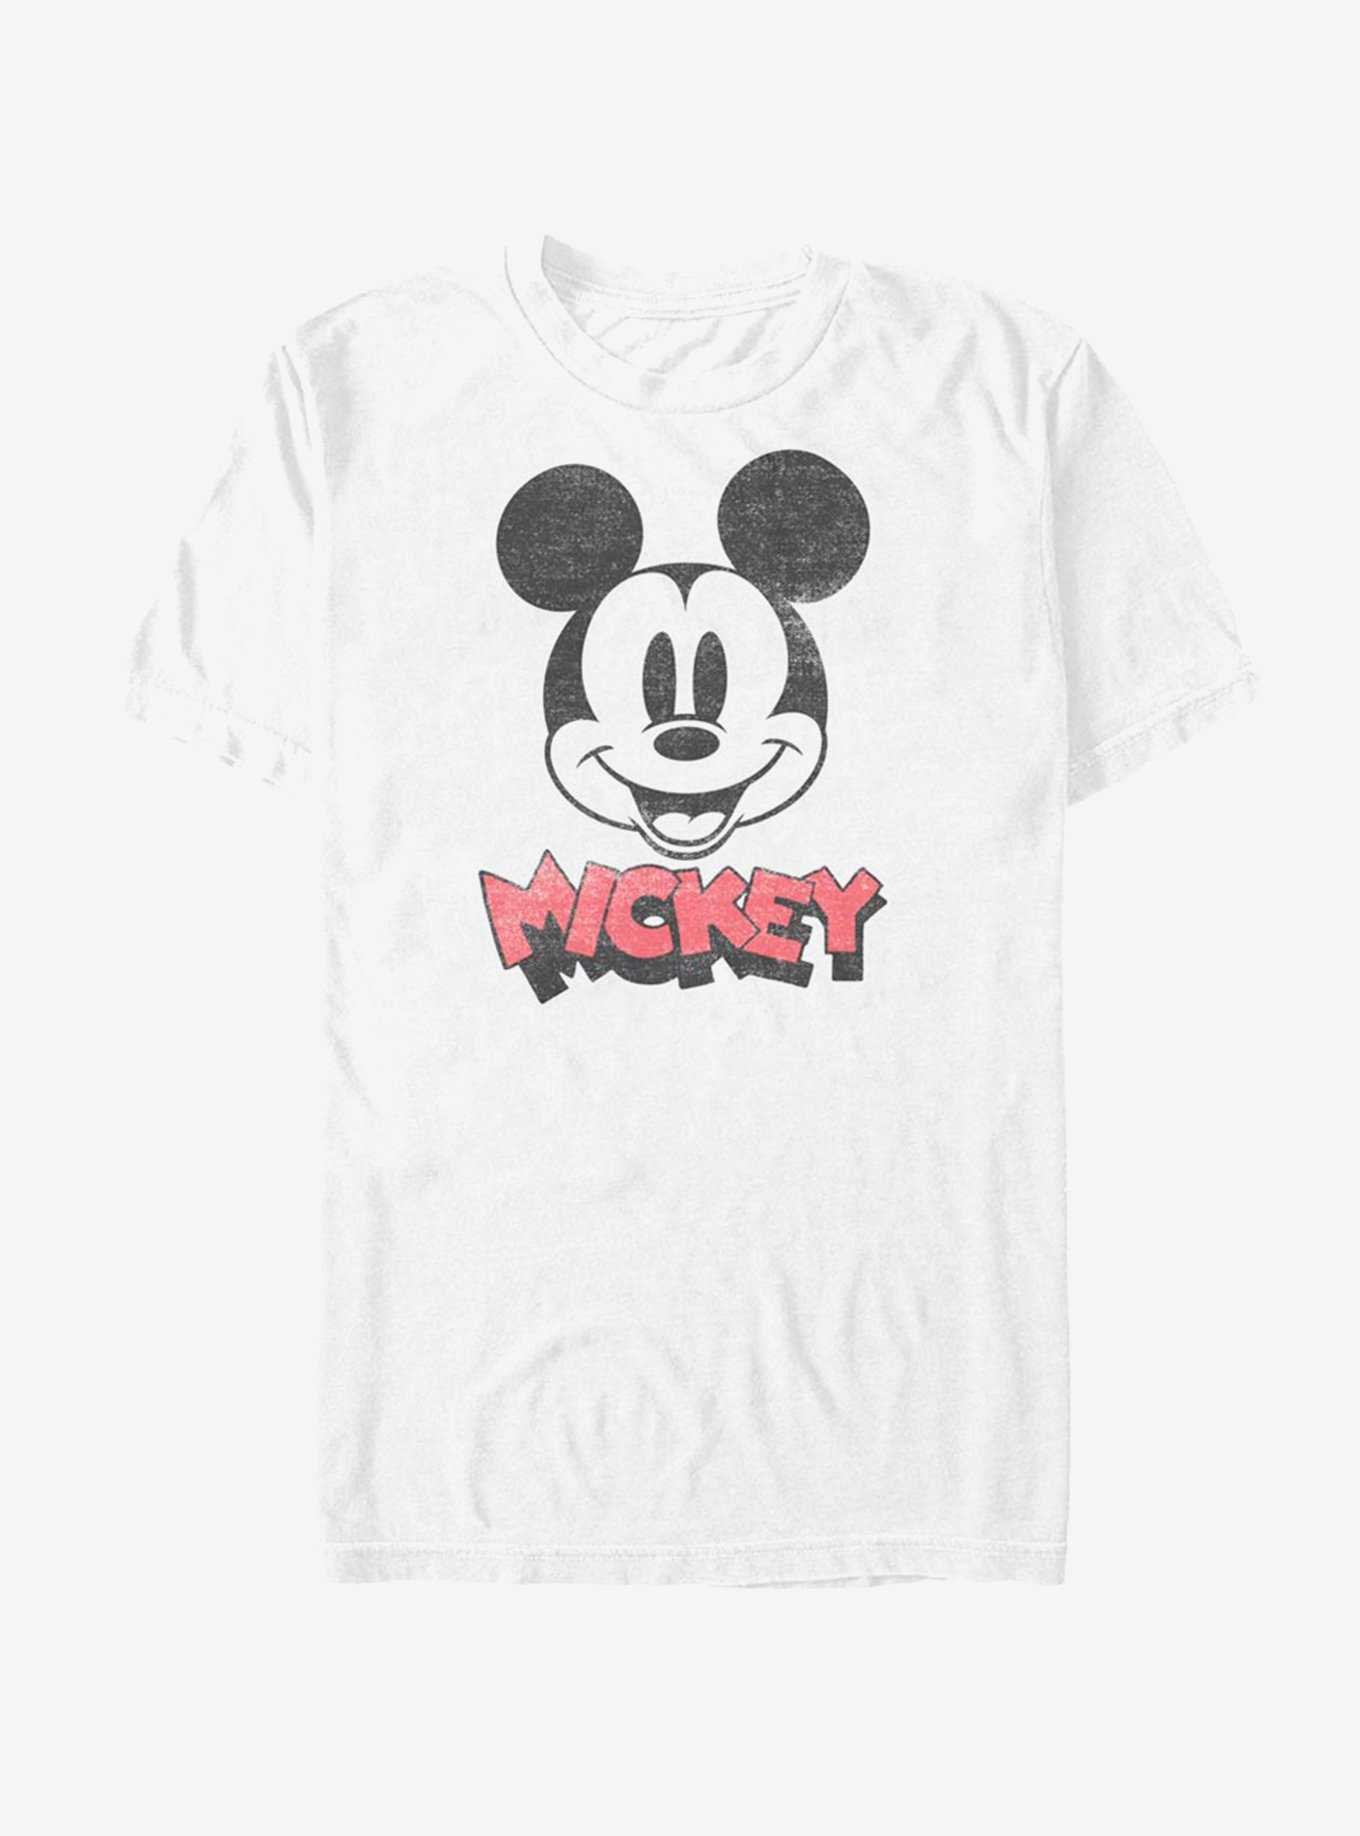 Disney Mickey Mouse Heads Up T-Shirt, , hi-res